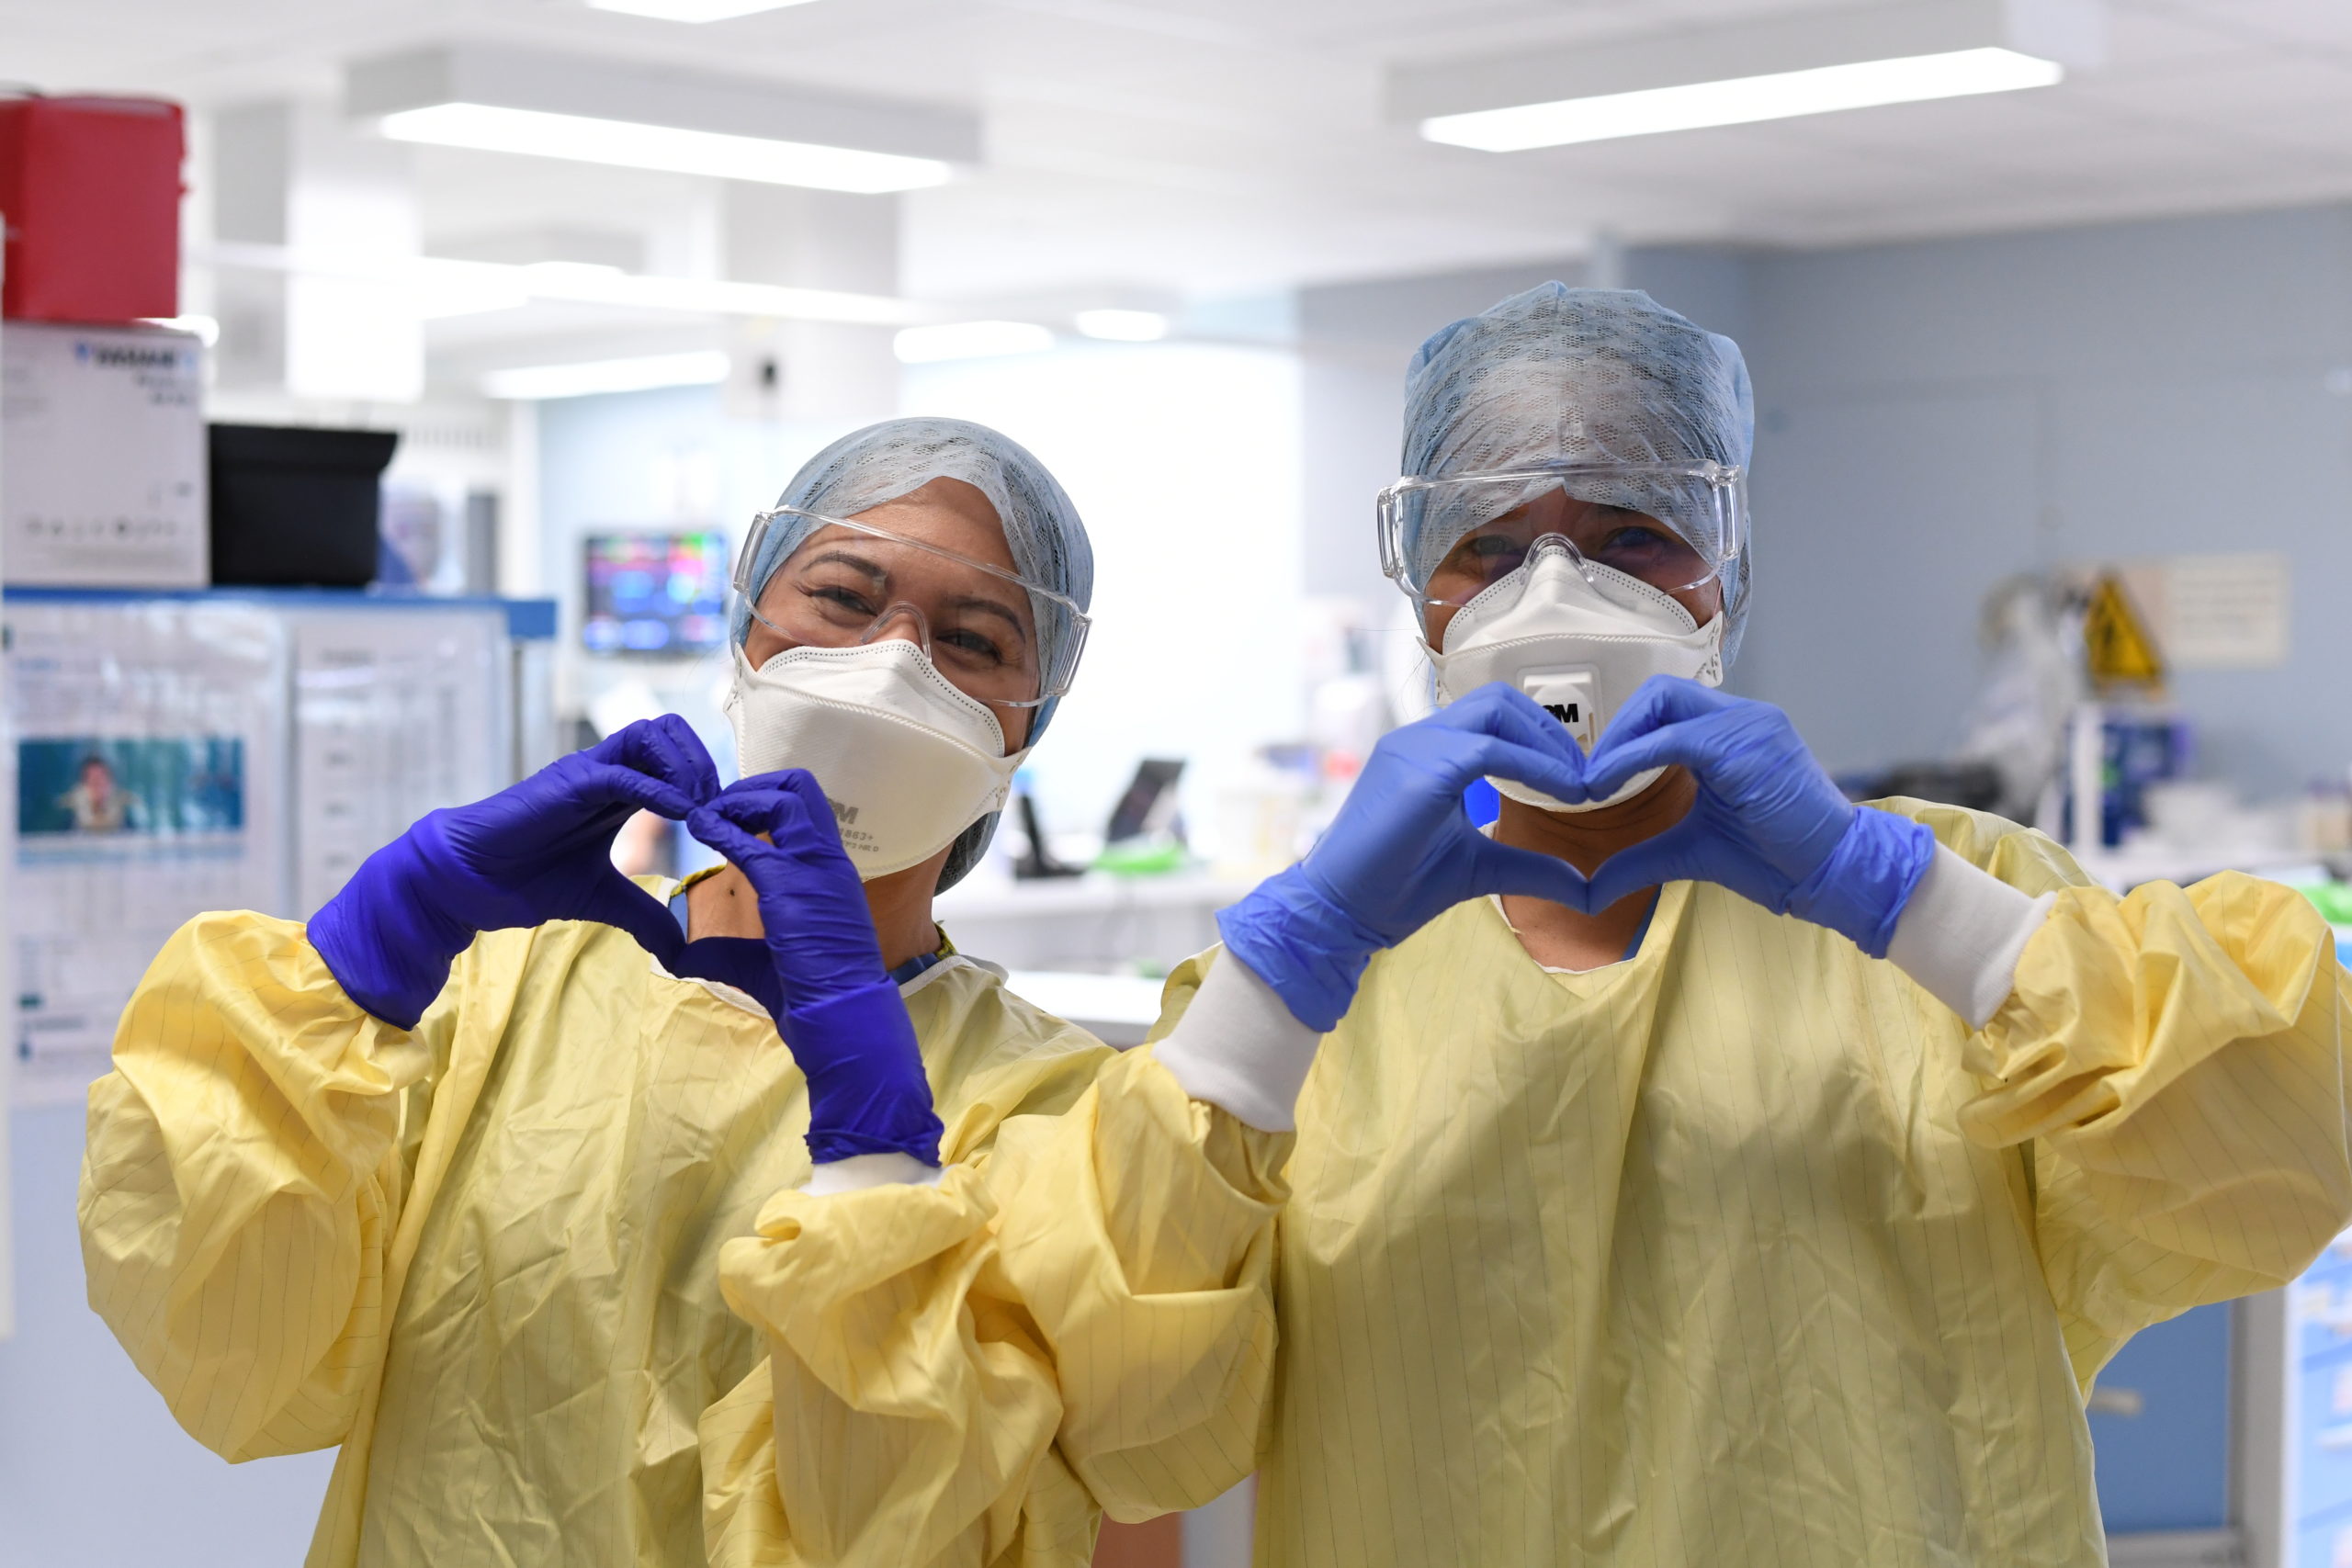 Two nurses in scrubs making aheart shape with their hands